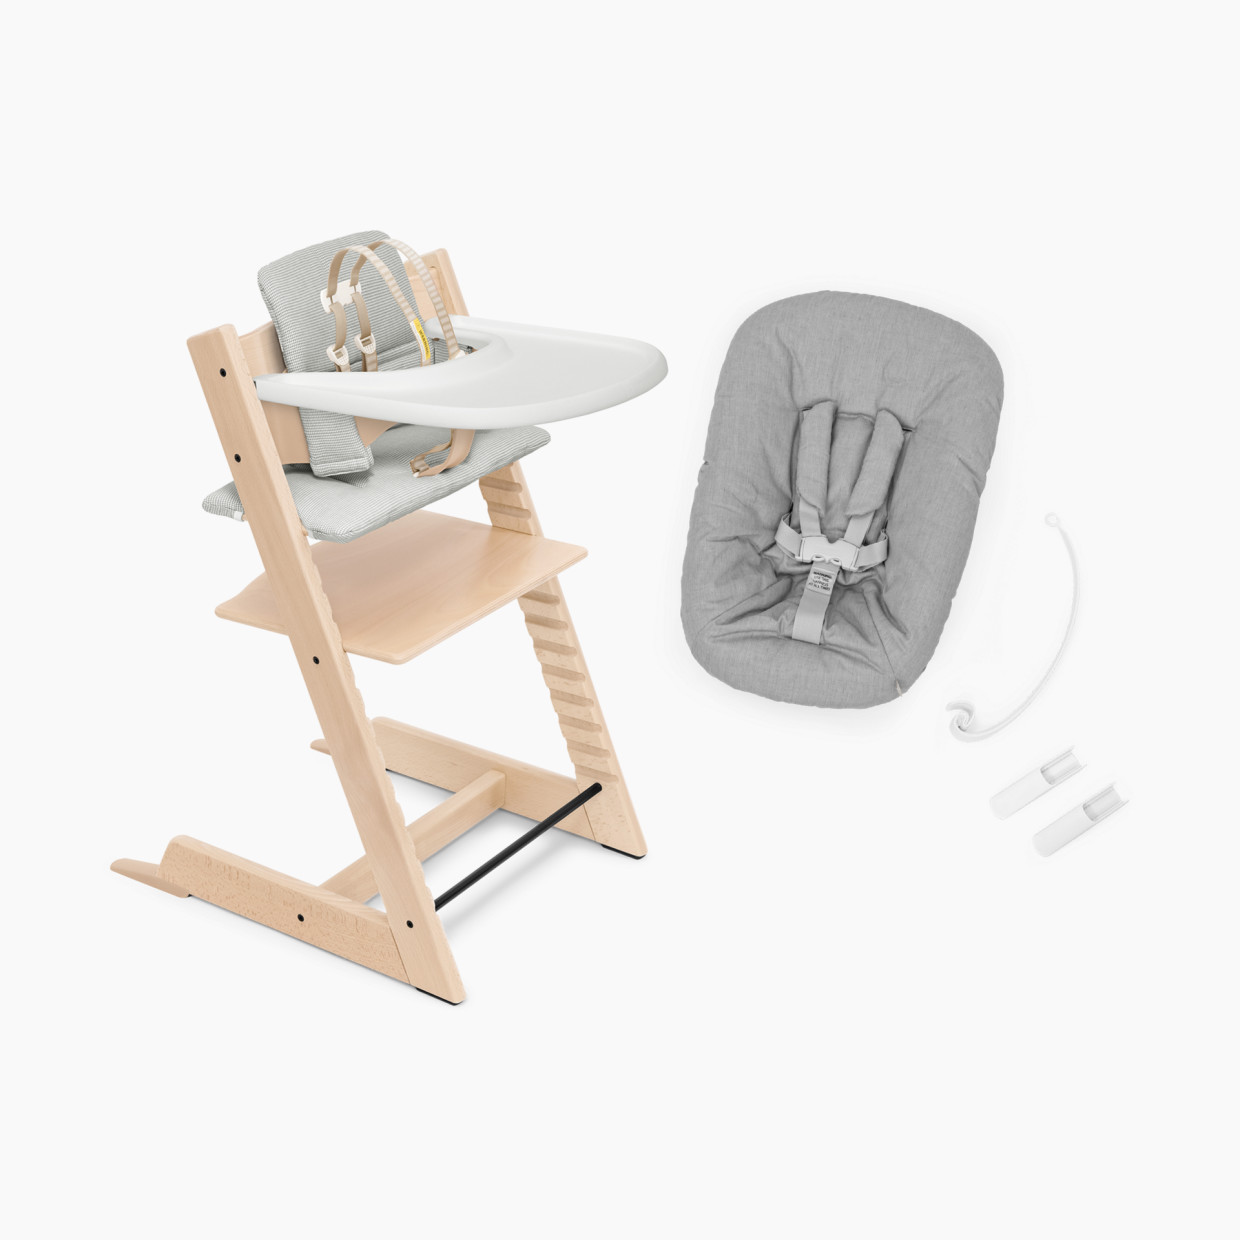 Stokke Tripp Trapp High Chair Complete + Newborn Set - Natural/Nordic Cushion/White Tray.